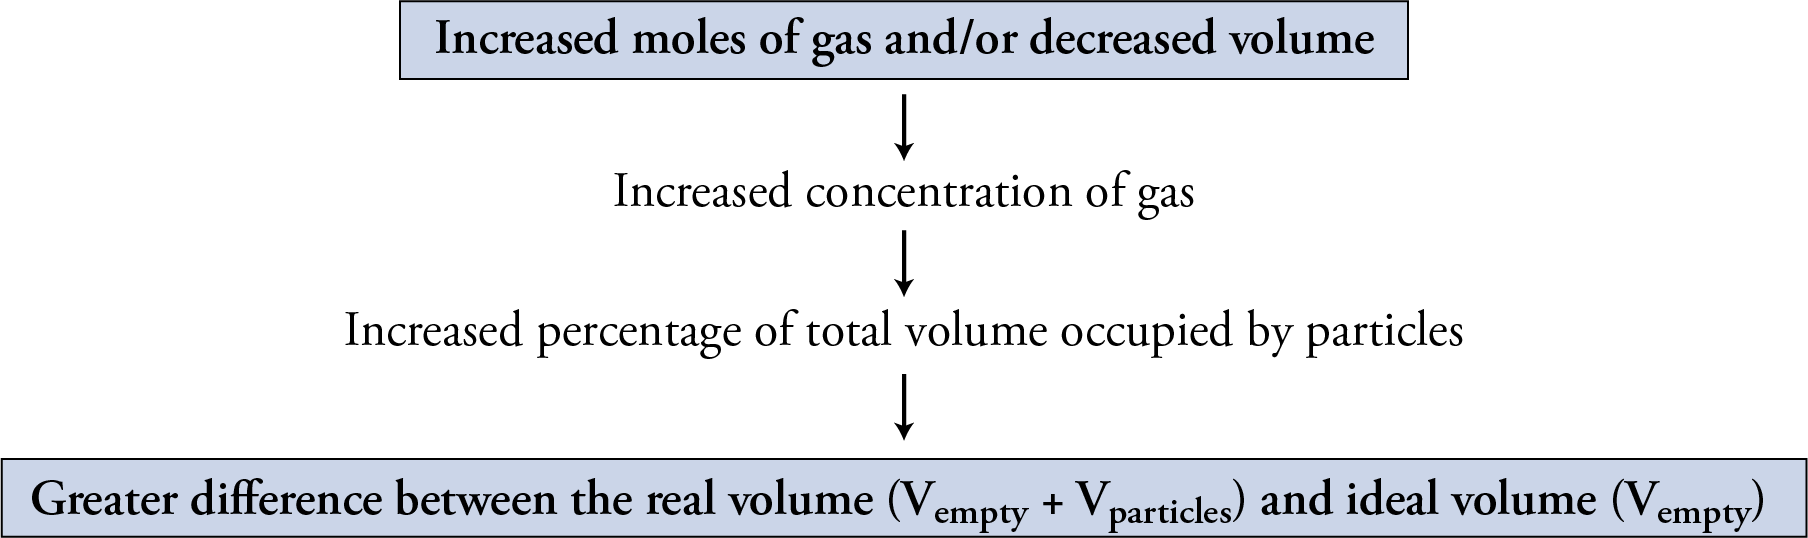 Image showing the logic that explains why increased moles of gas and/or decreased volume leads to a voleme for a real gas that is greater than the volume predicted from the ideal gas equation.